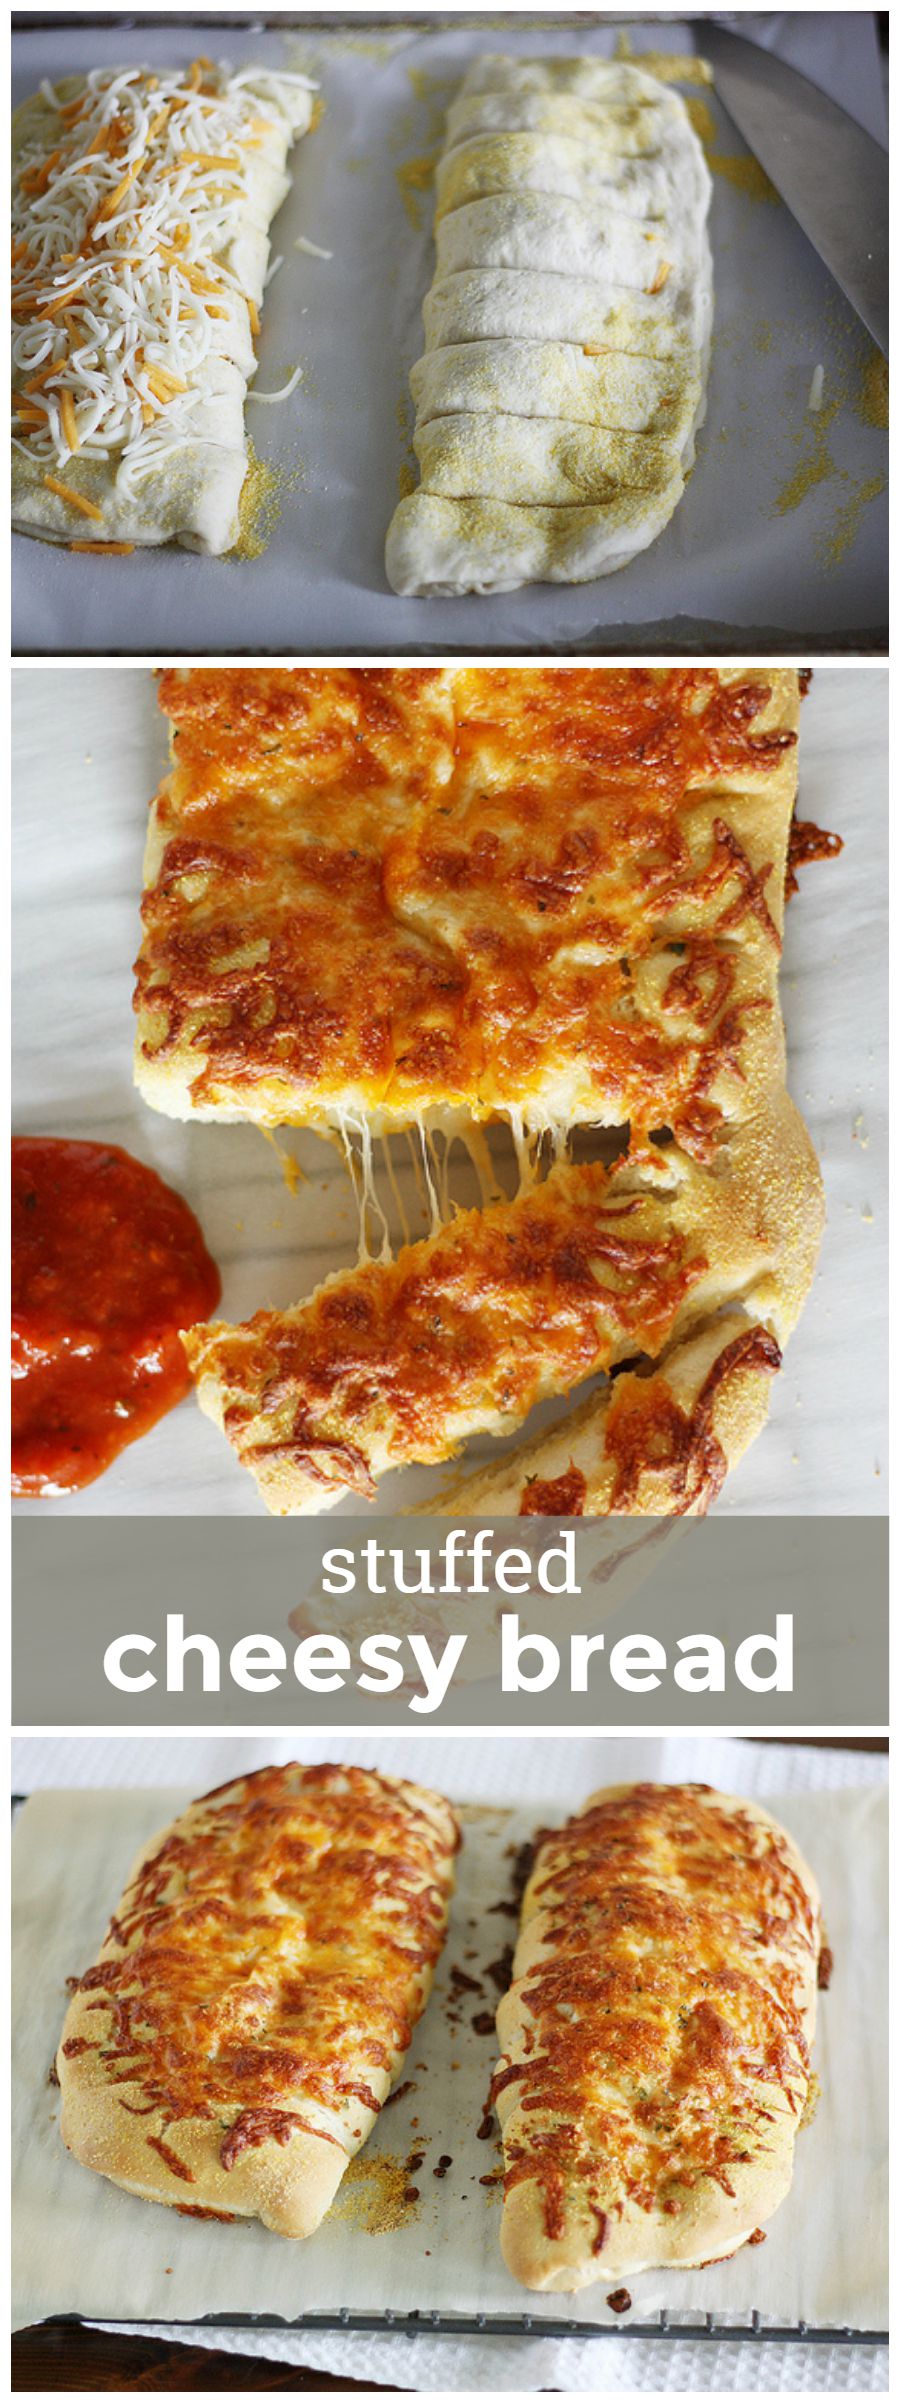 Stuffed Cheesy Bread -- You won't believe how easy it is to make this delicious melty cheese-stuffed bread! www.girlversusdough.com @girlversusdough